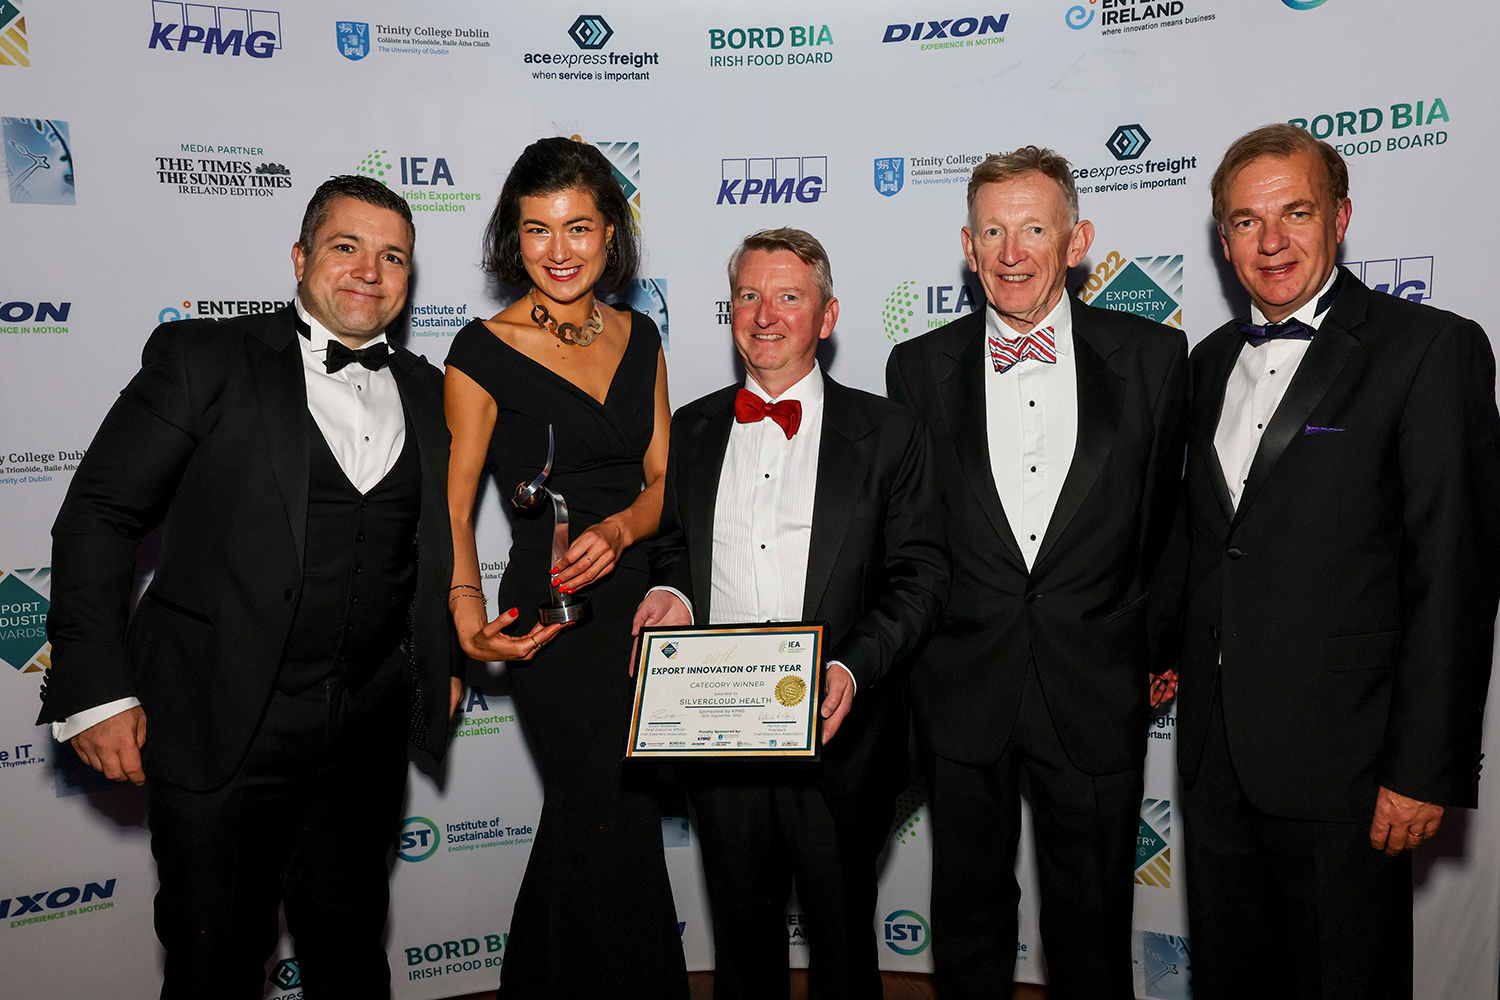 KPMG’s Niall Savage presenting the Export Innovation of the Year award to SilverCloud Health.